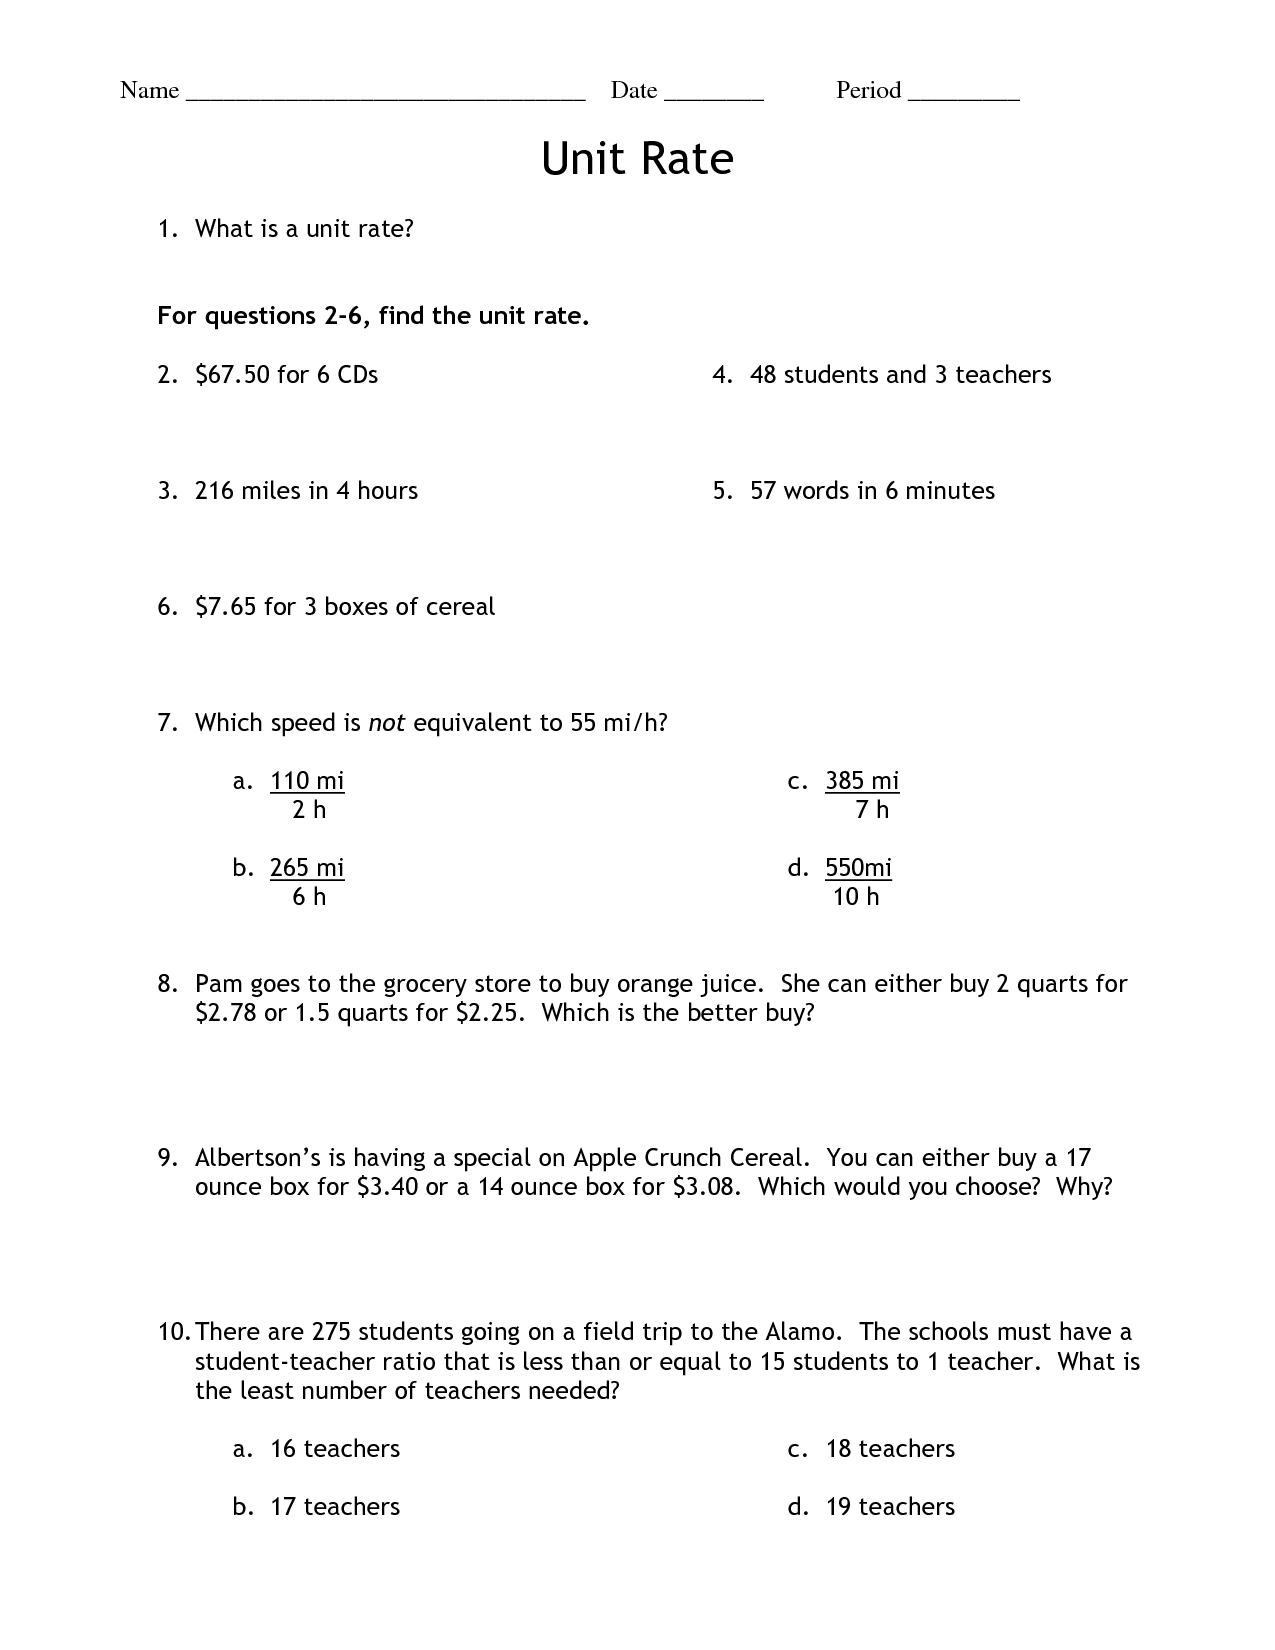 unit-rates-with-fractions-worksheet-answers-nms-self-paced-math-7th-printable-primary-math